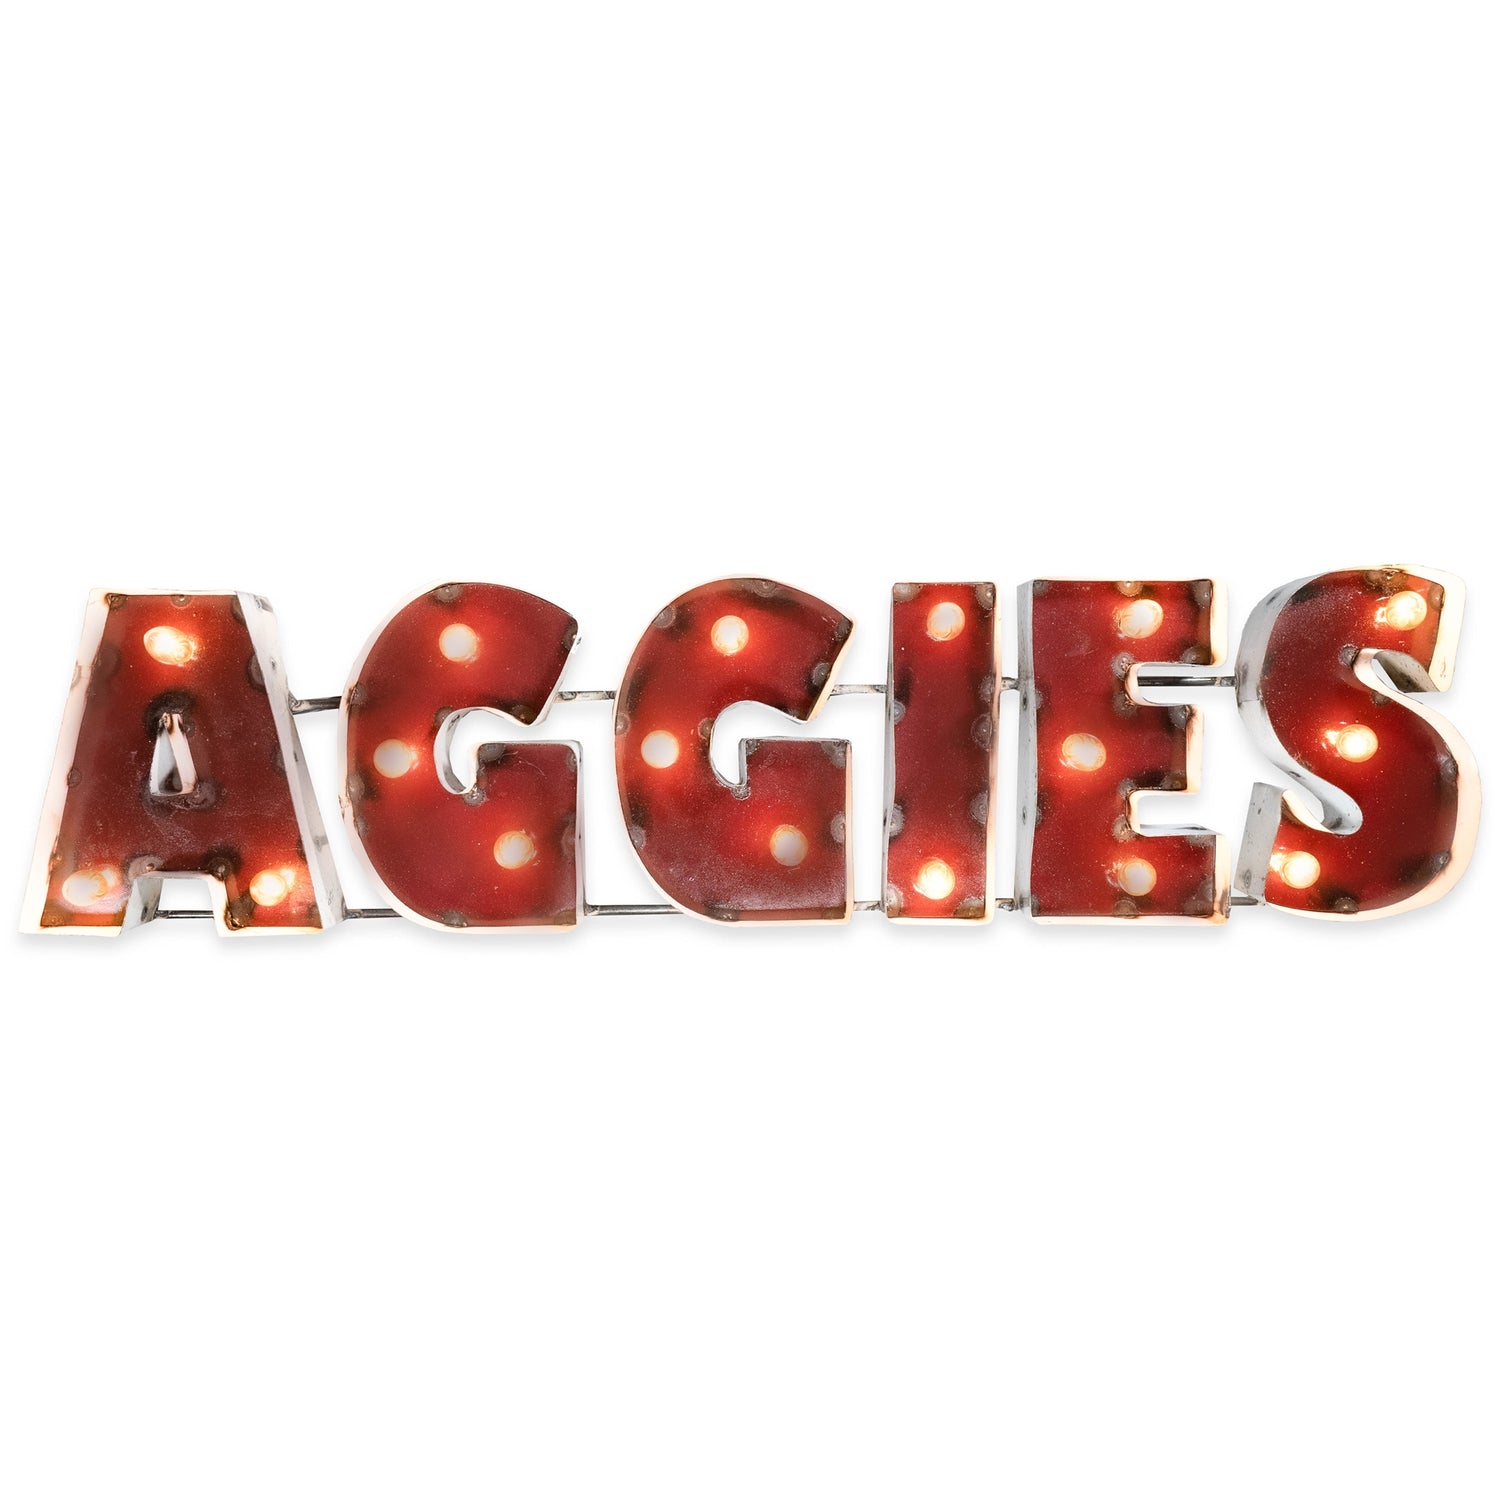 Block Aggies Metal Sign With Lights